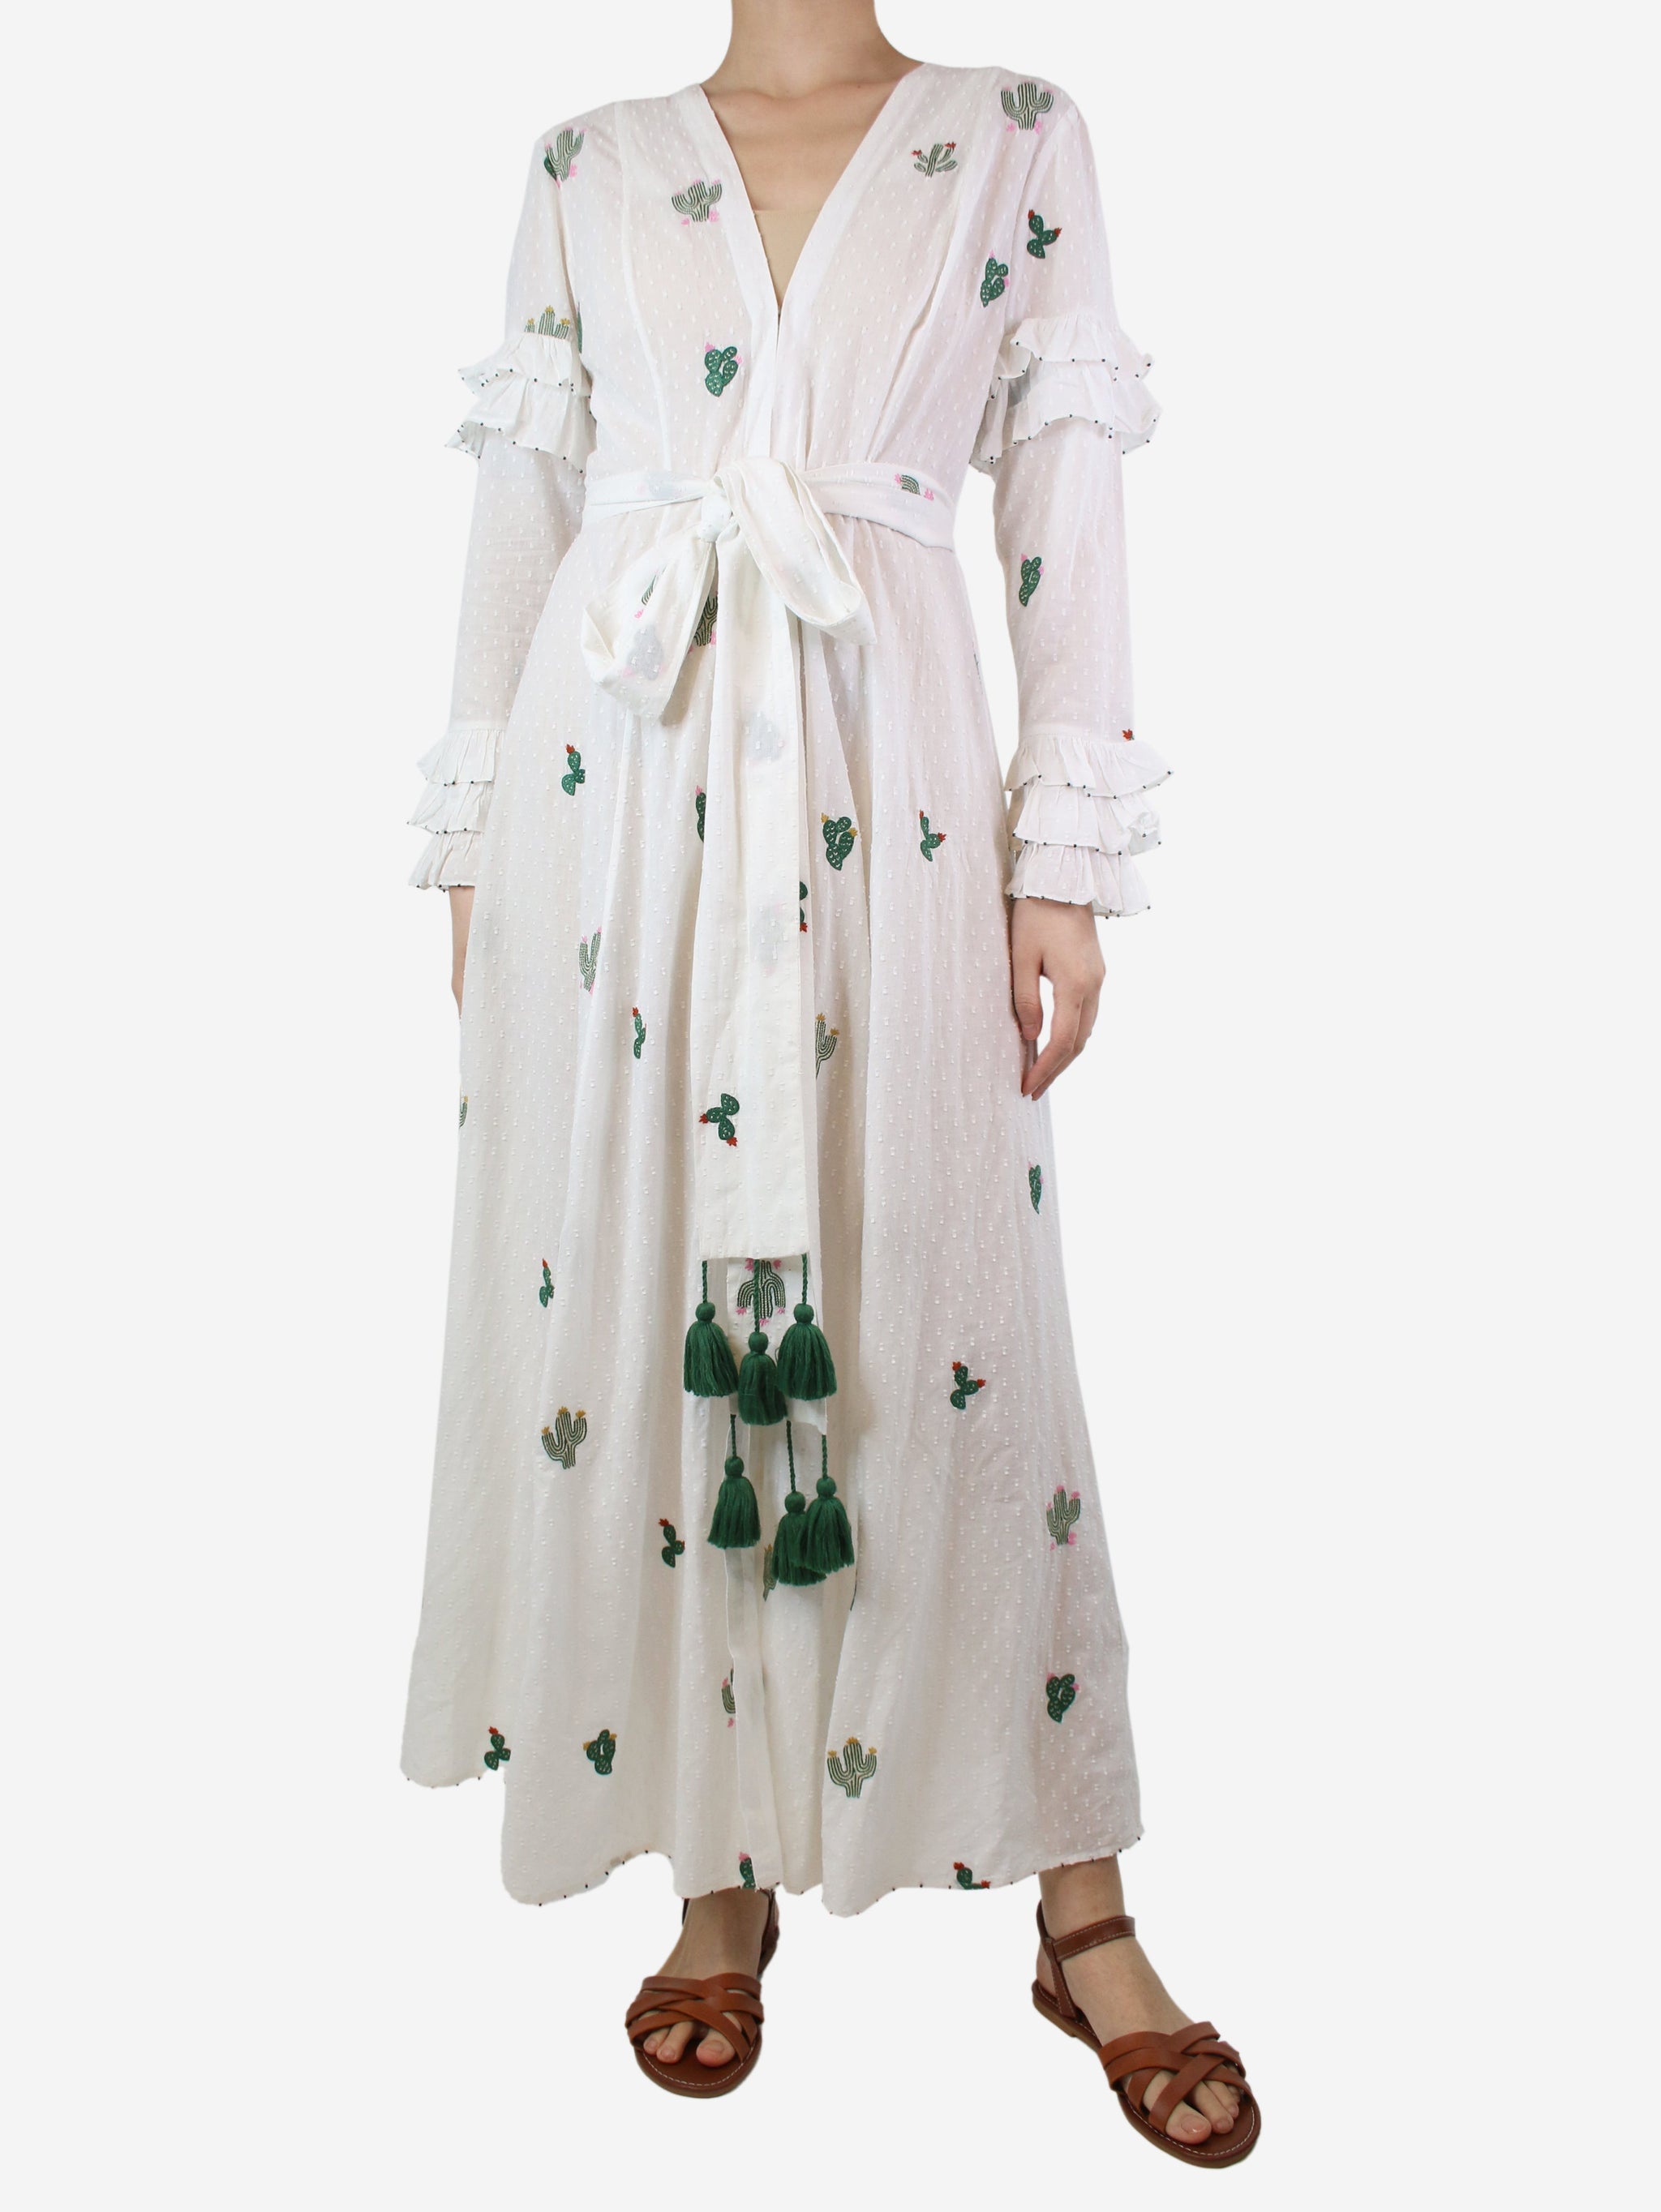 We Are Leone pre-owned white textured cactus embroidered dress - size S ...